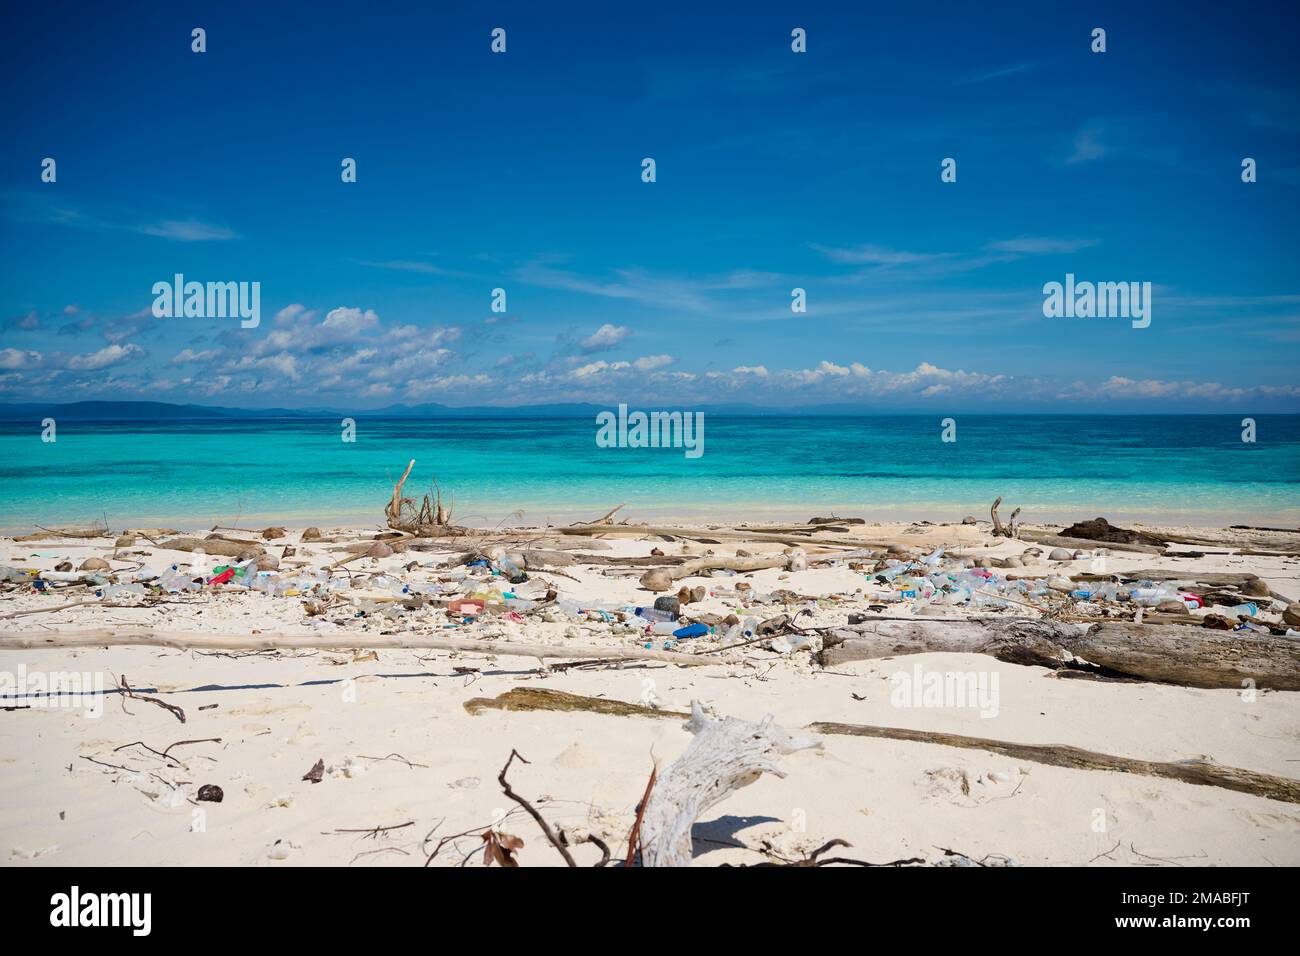 The sad truth of how plastic ends up on the worlds beaches after being thrown away. Stock Photo